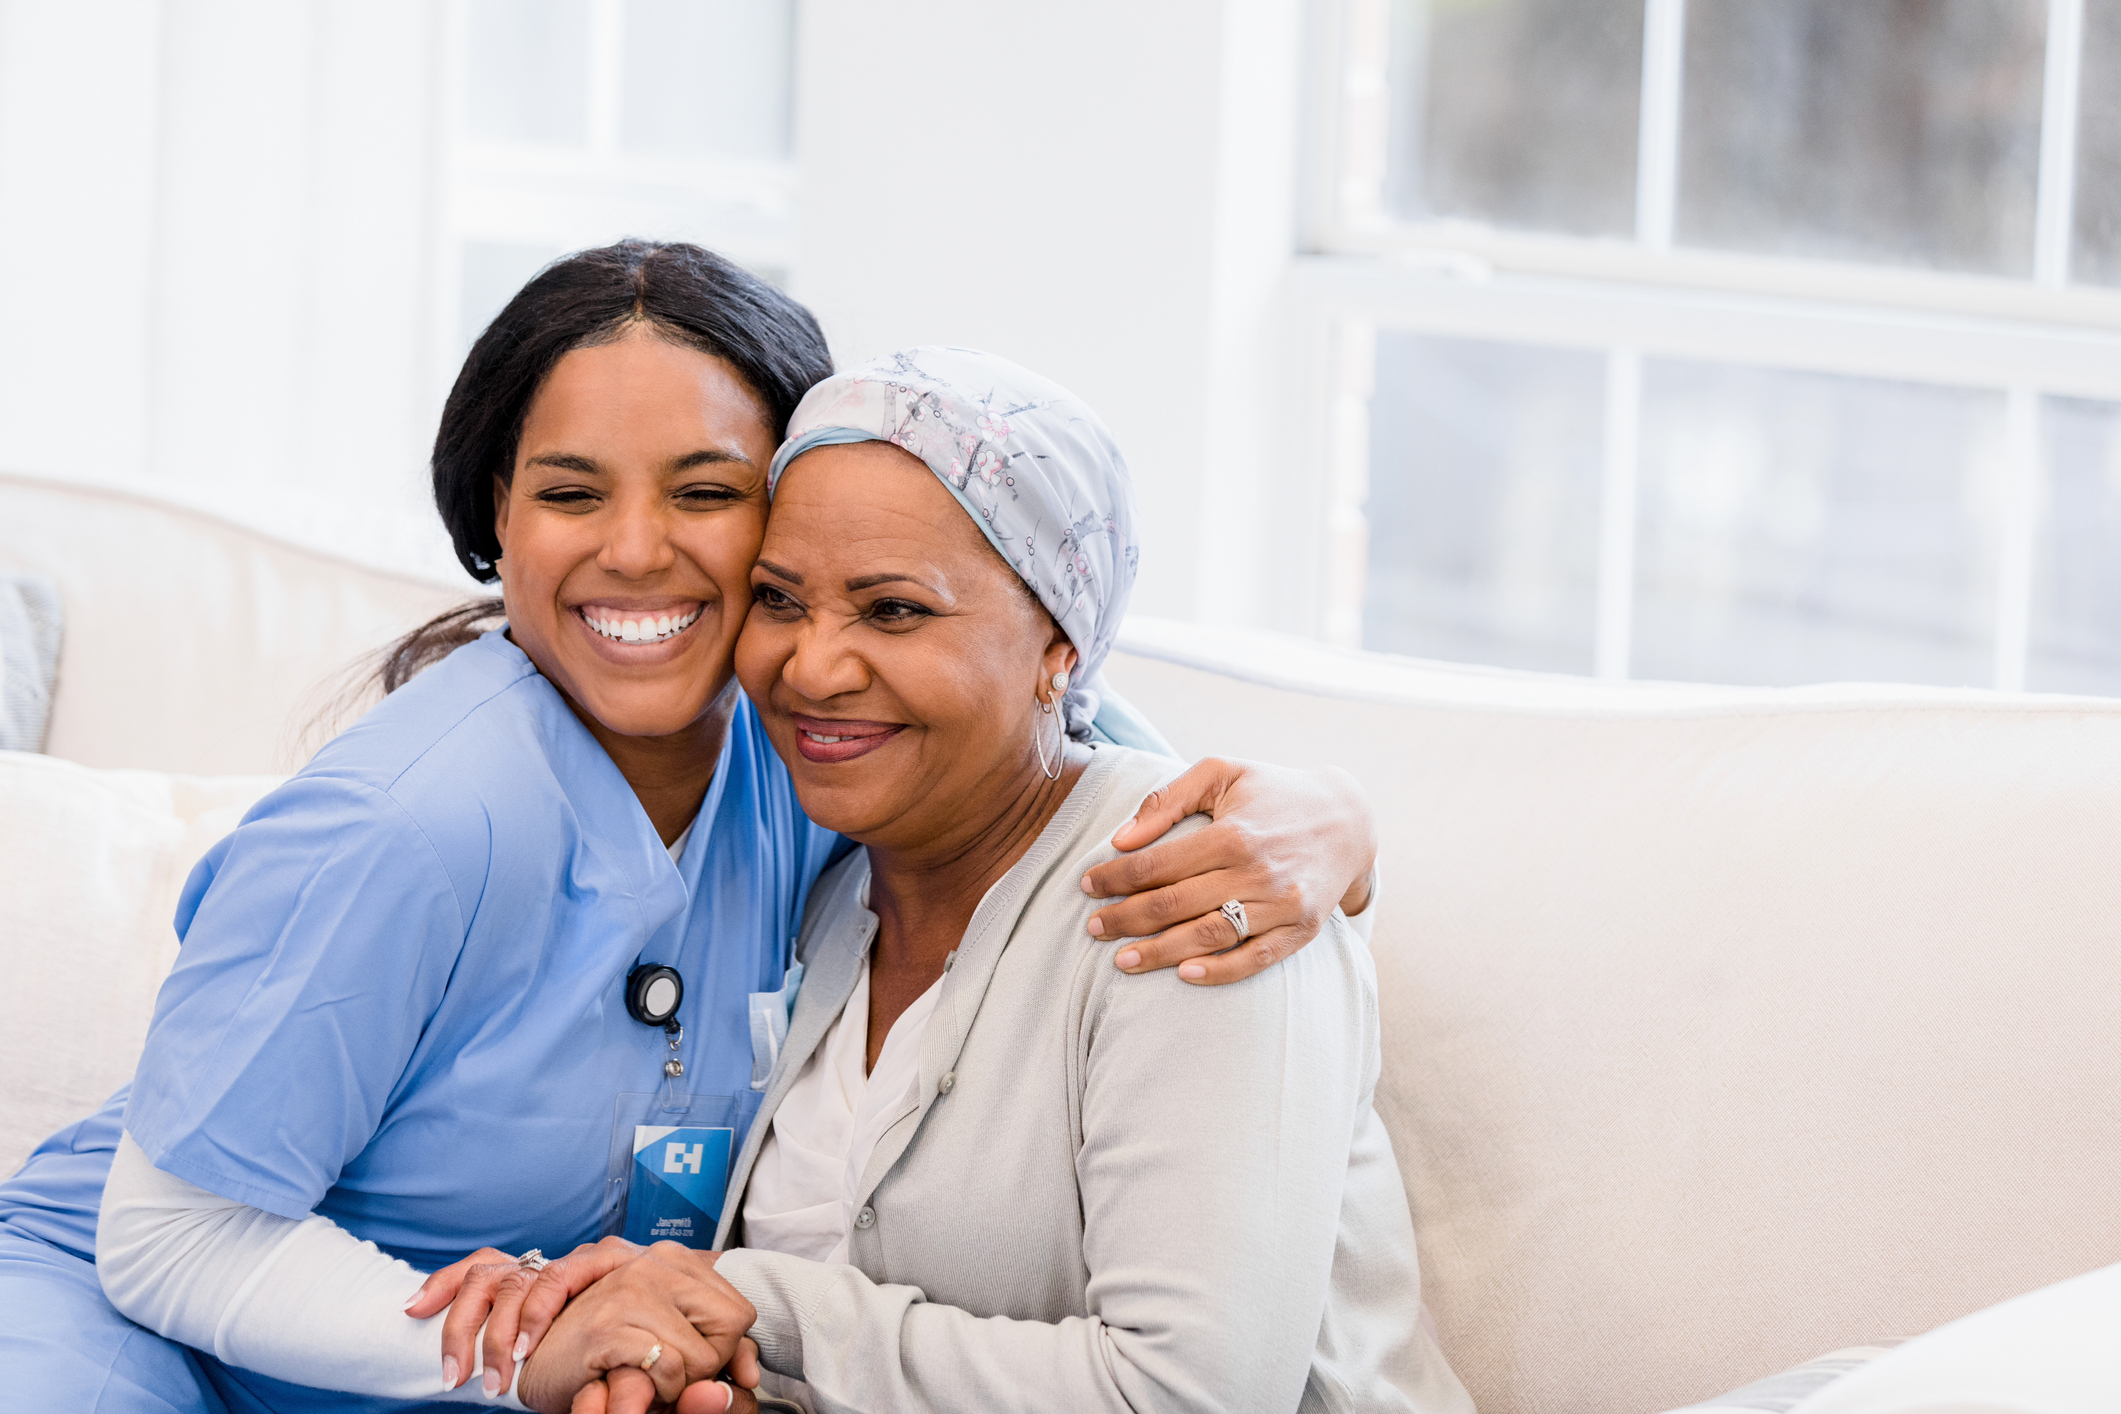 Home health care nurse embraces her patient at home.